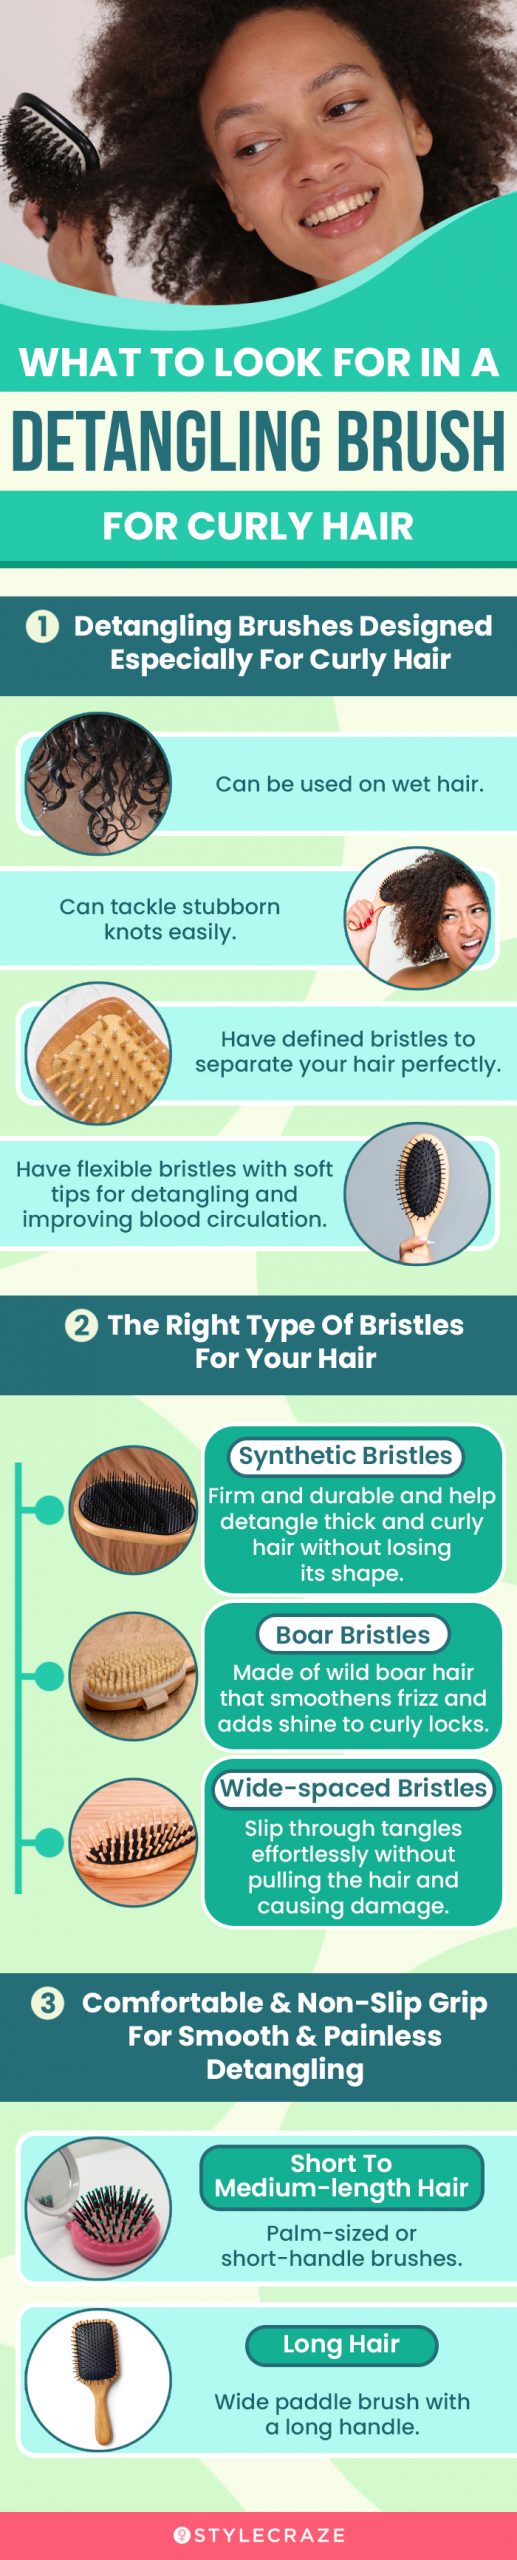 What To Look For In A Detangling Brush For Curly Hair (infographic)